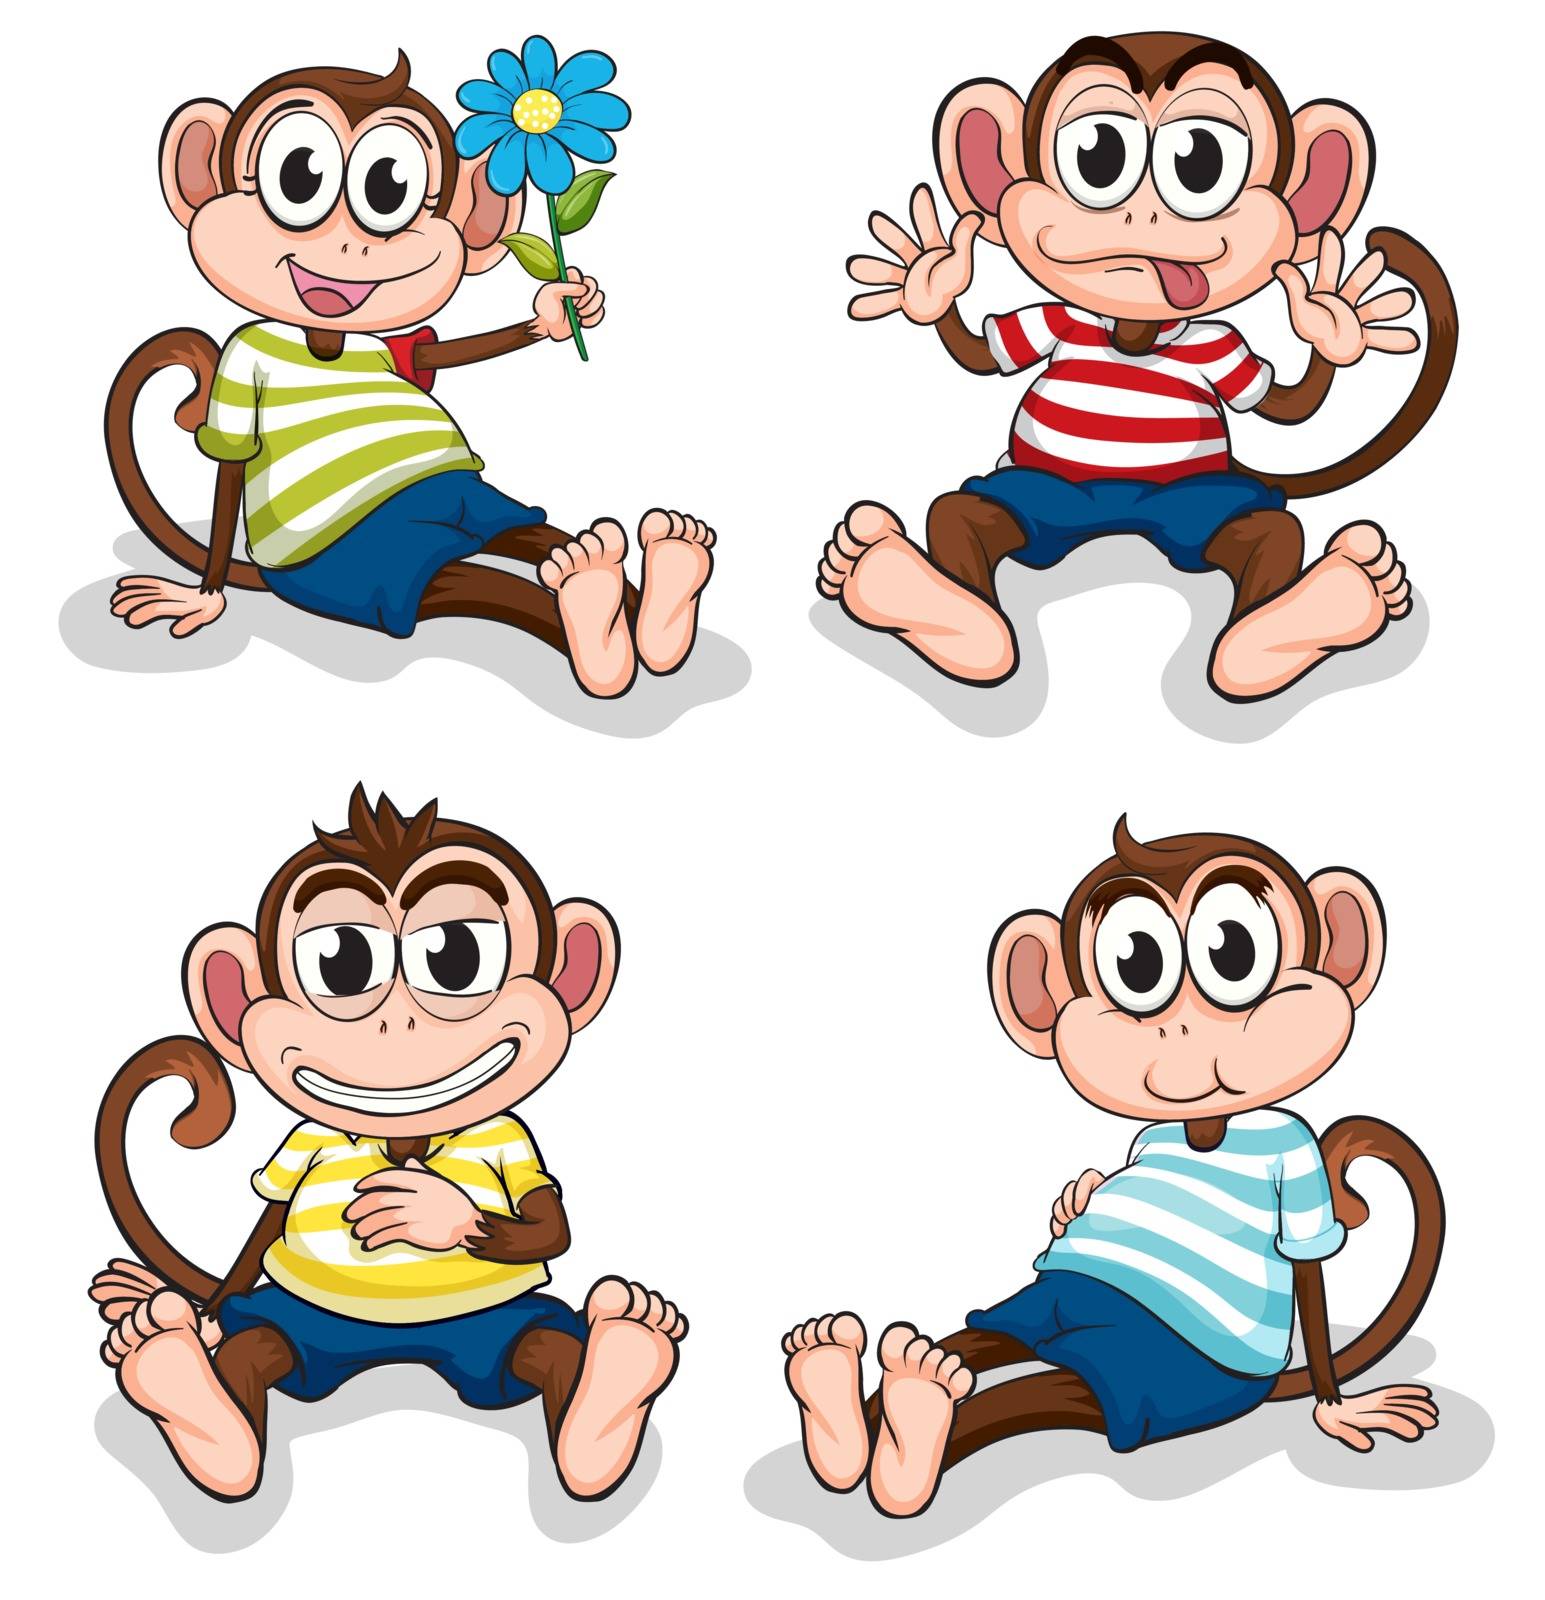 Illustration of monkeys with different facial expressions on a white background